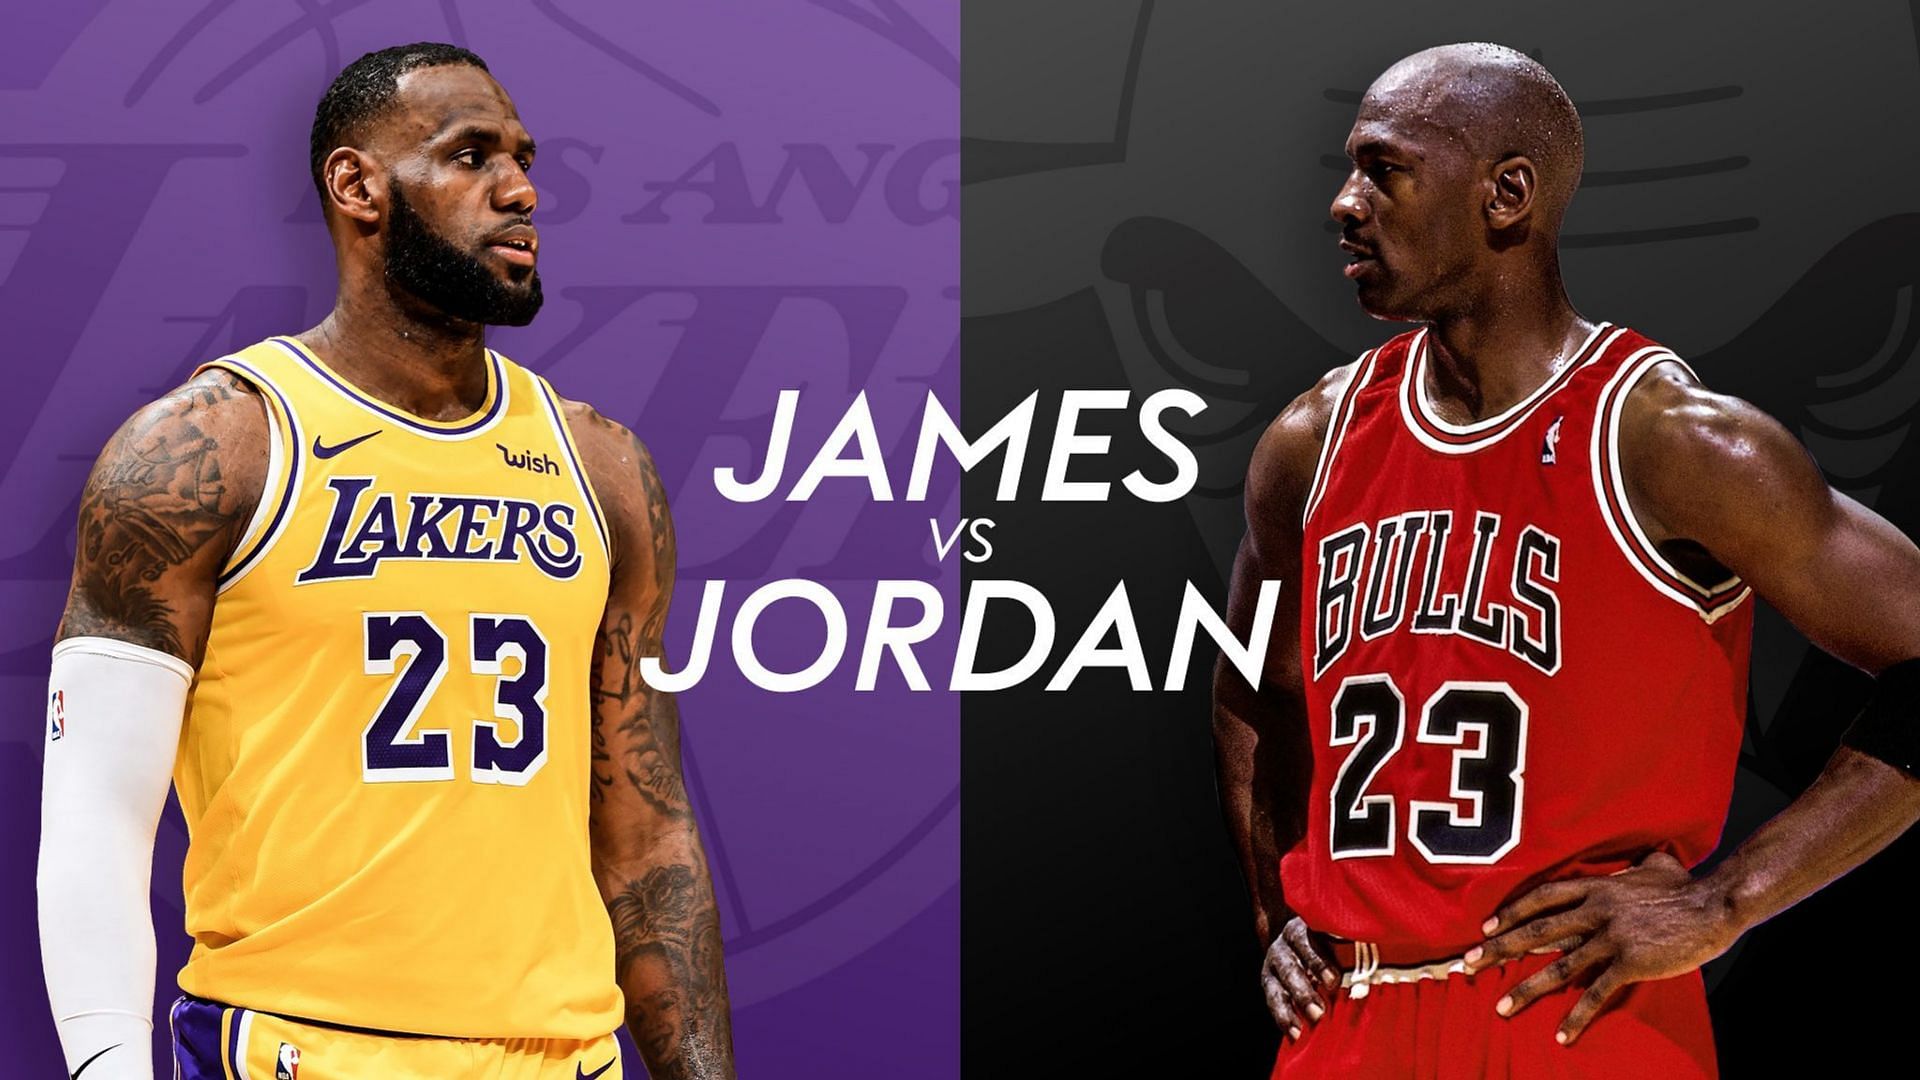 Michael Jordan accomplished more in 15 years than LeBron James has in 20 seasons. [photo: Sky Sports]